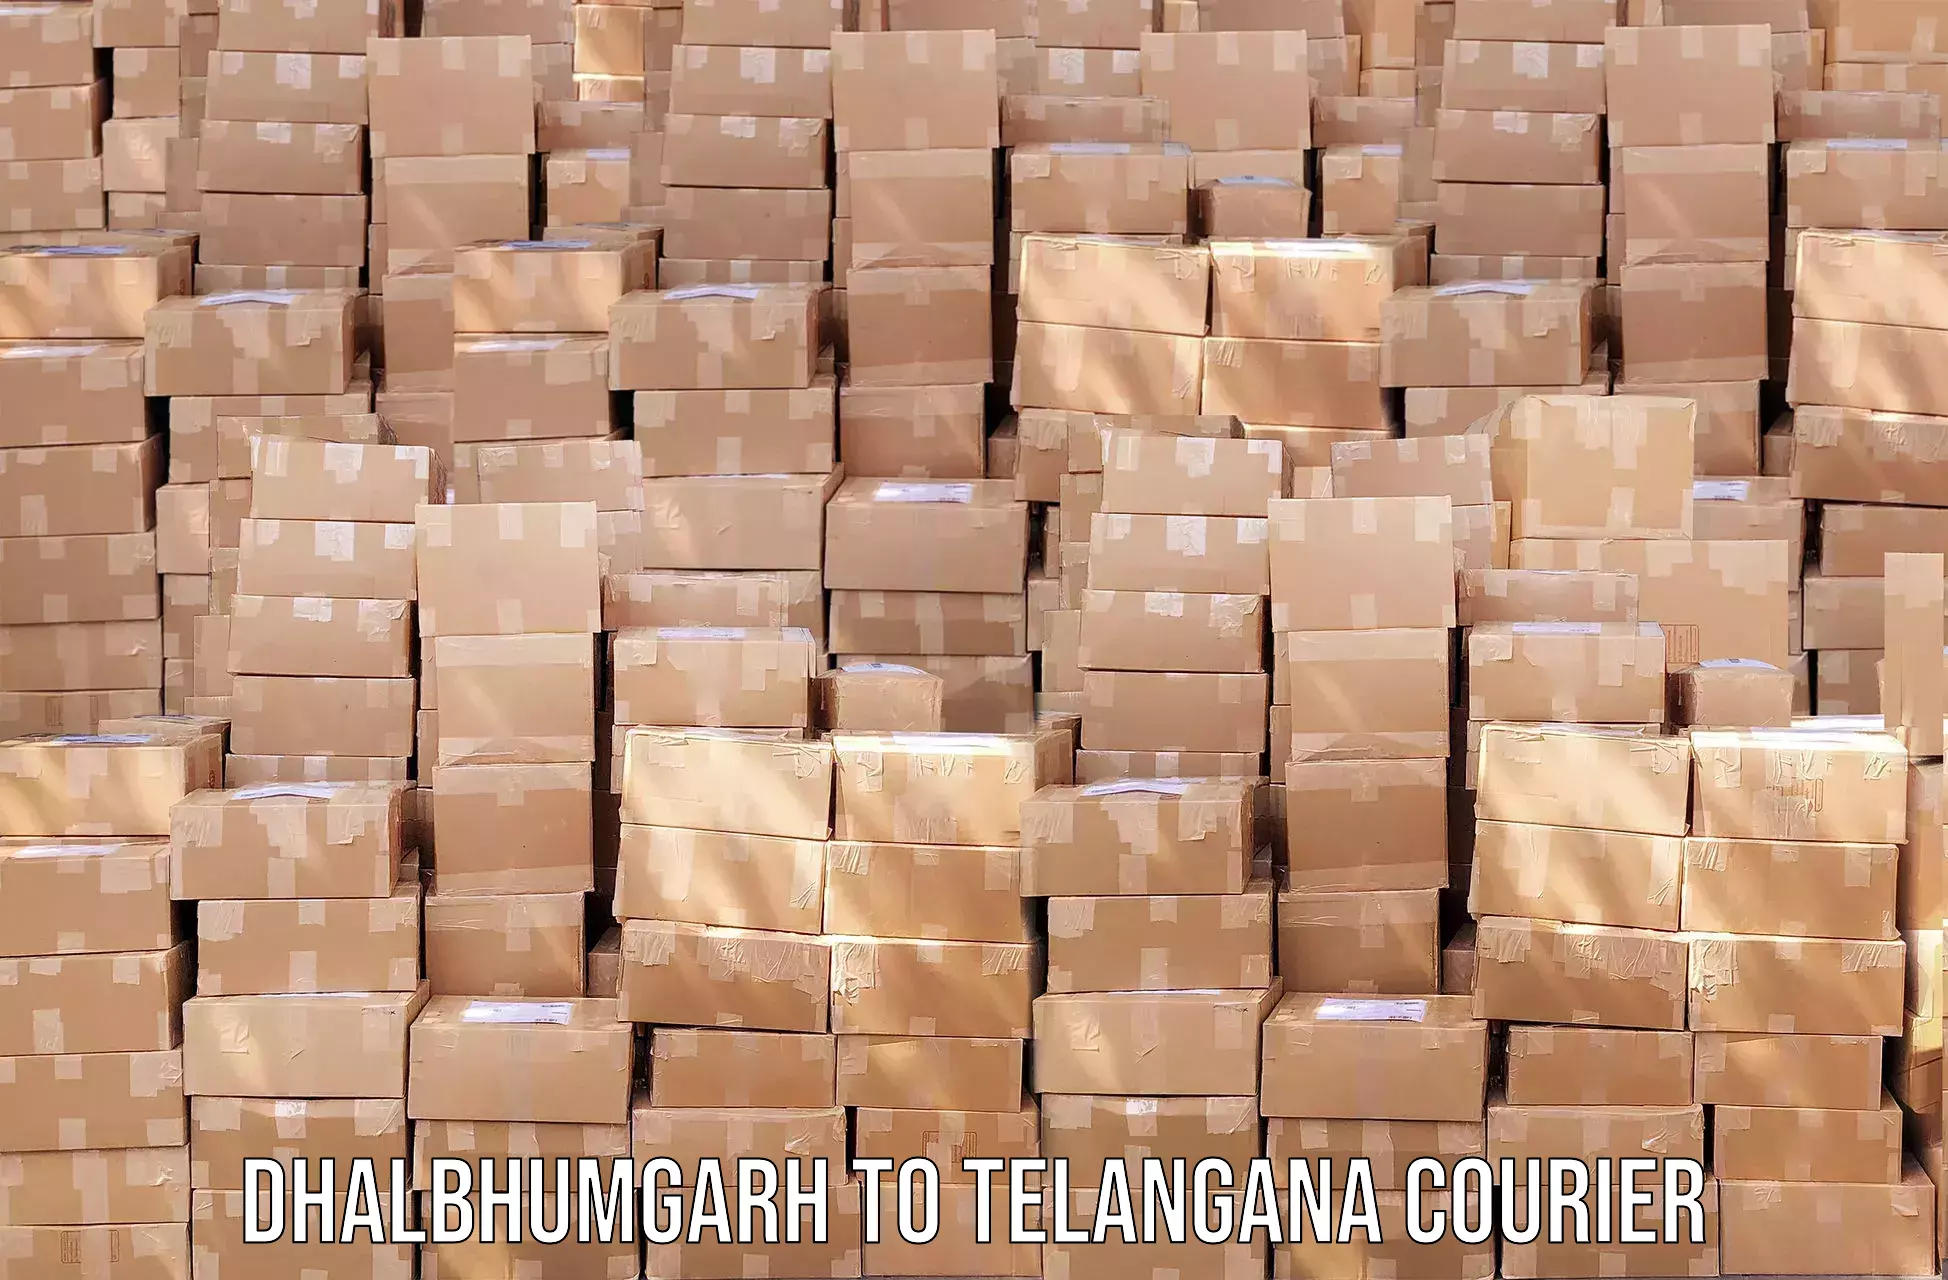 Courier service partnerships Dhalbhumgarh to Jogipet